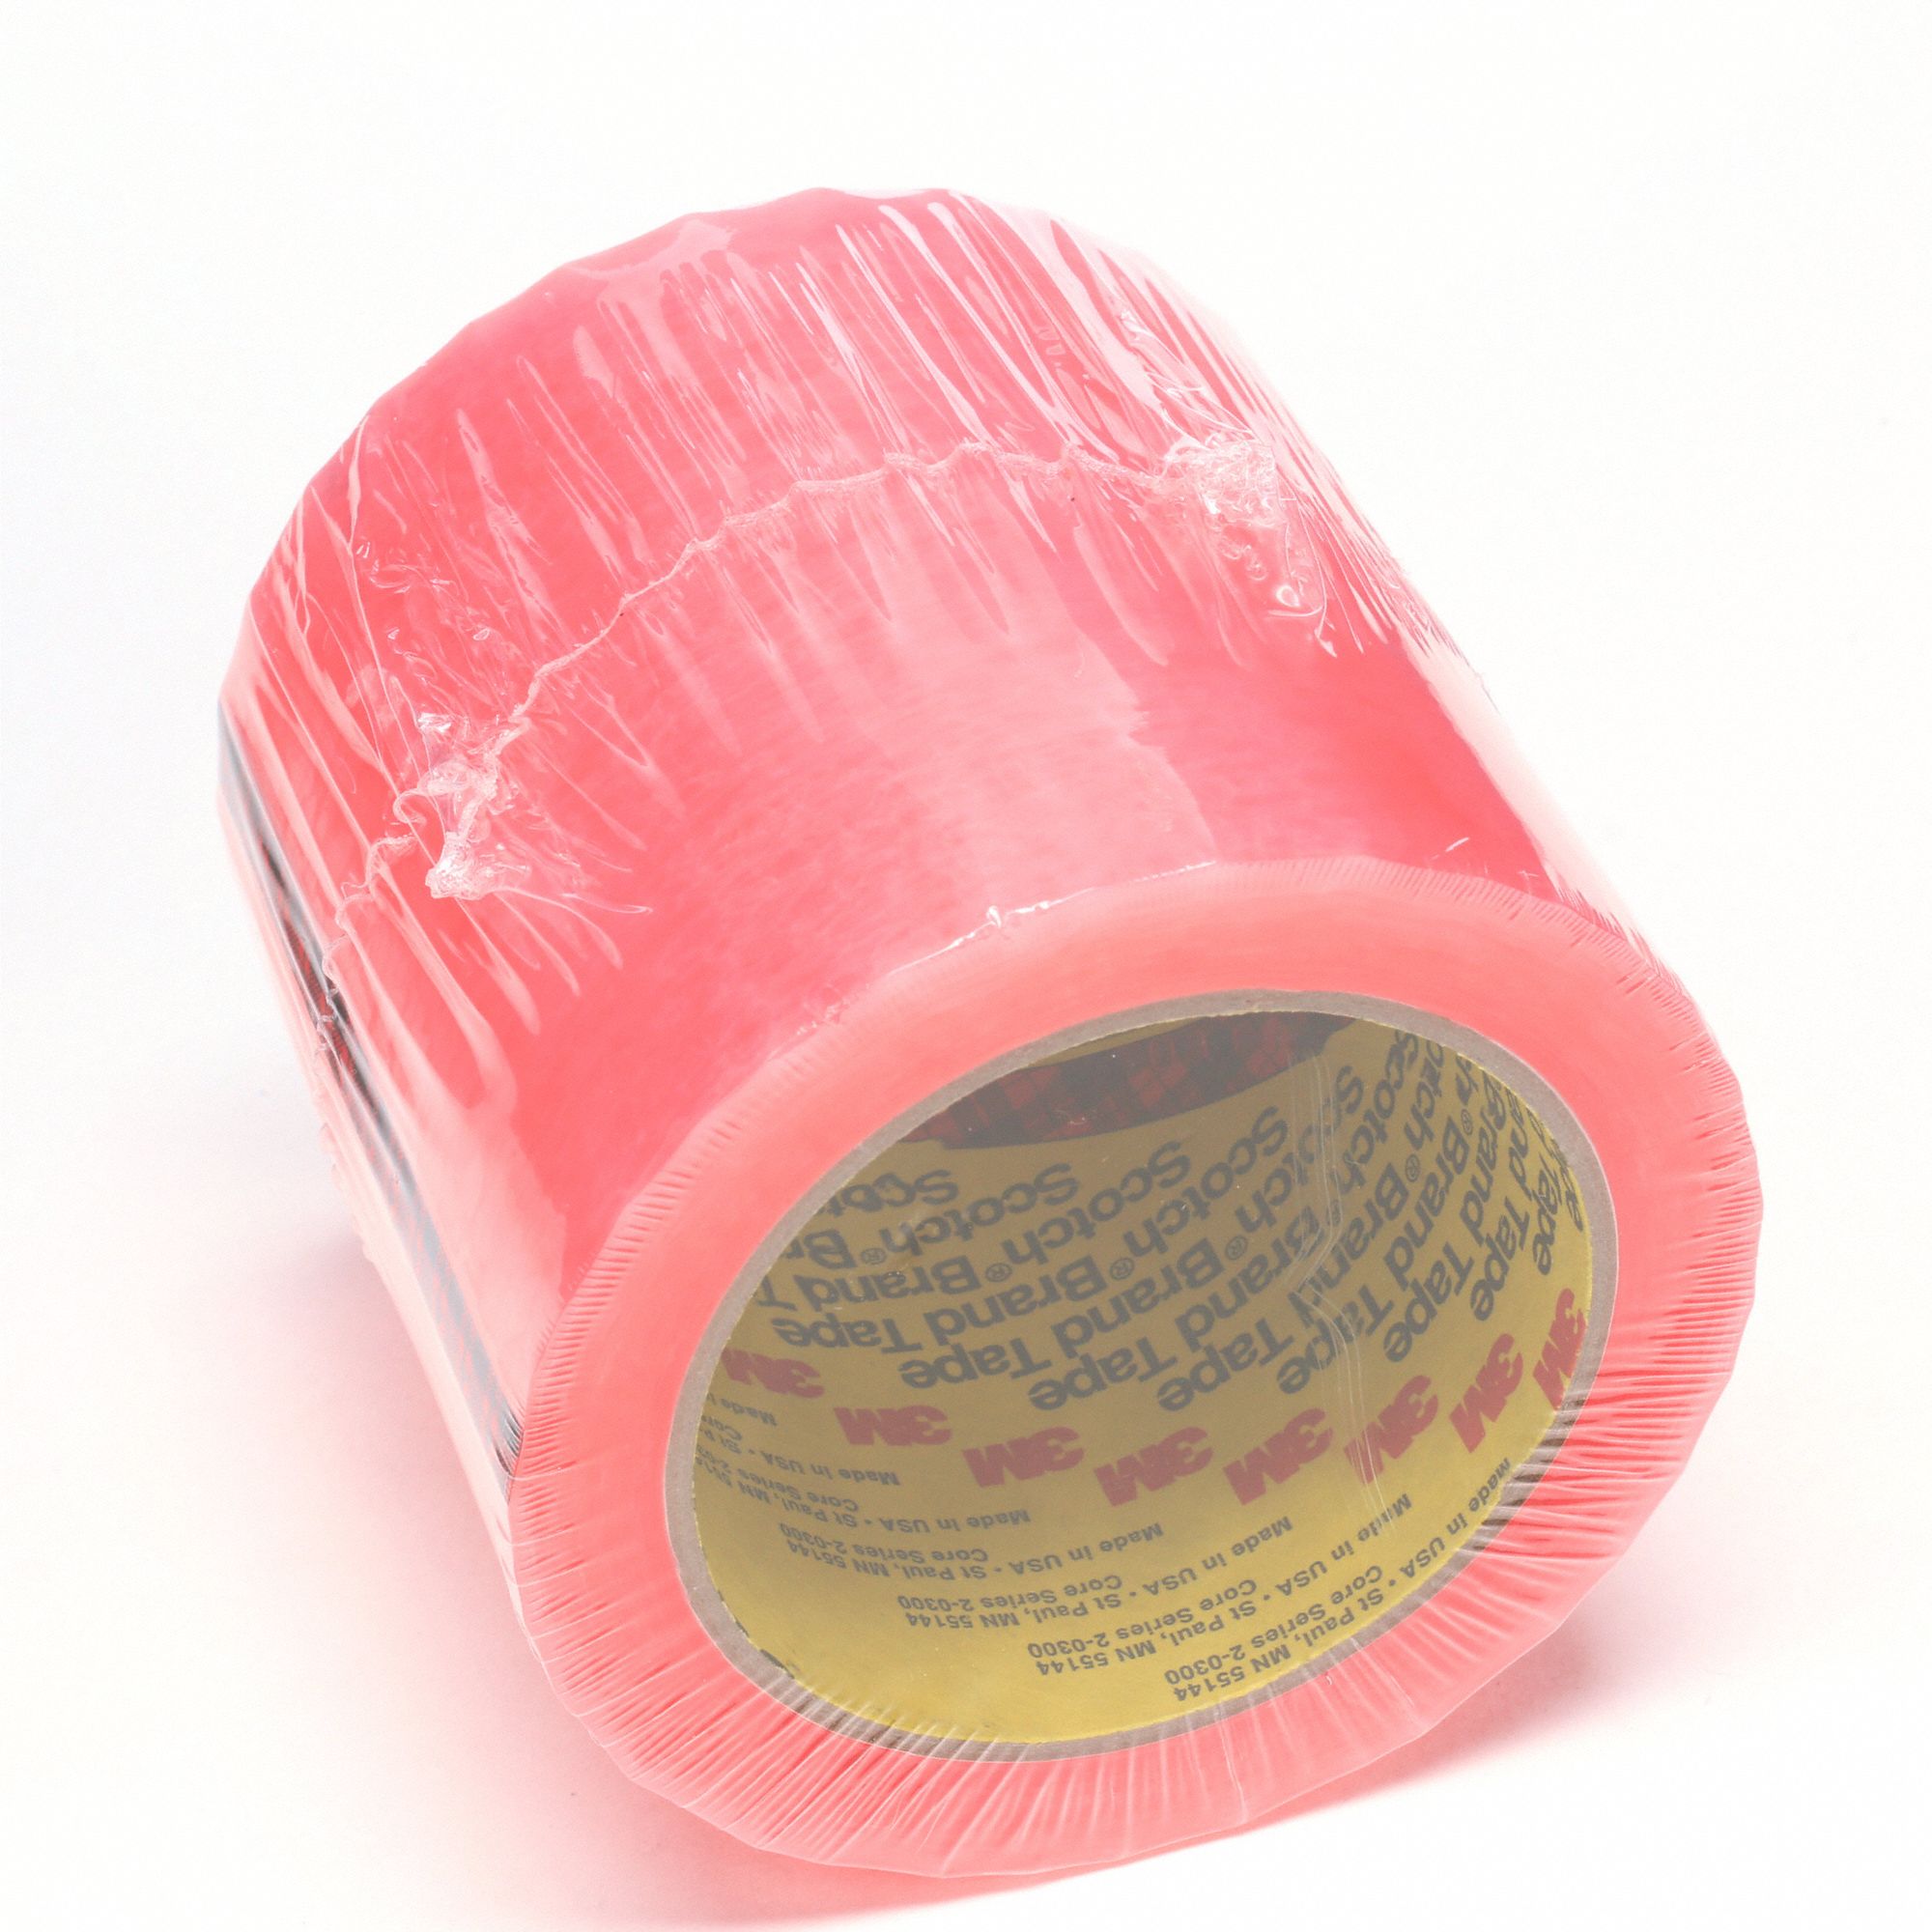 Label Protection Tape, Pink, Acrylic Tape Adhesive, Tape Application Hand -  Grainger